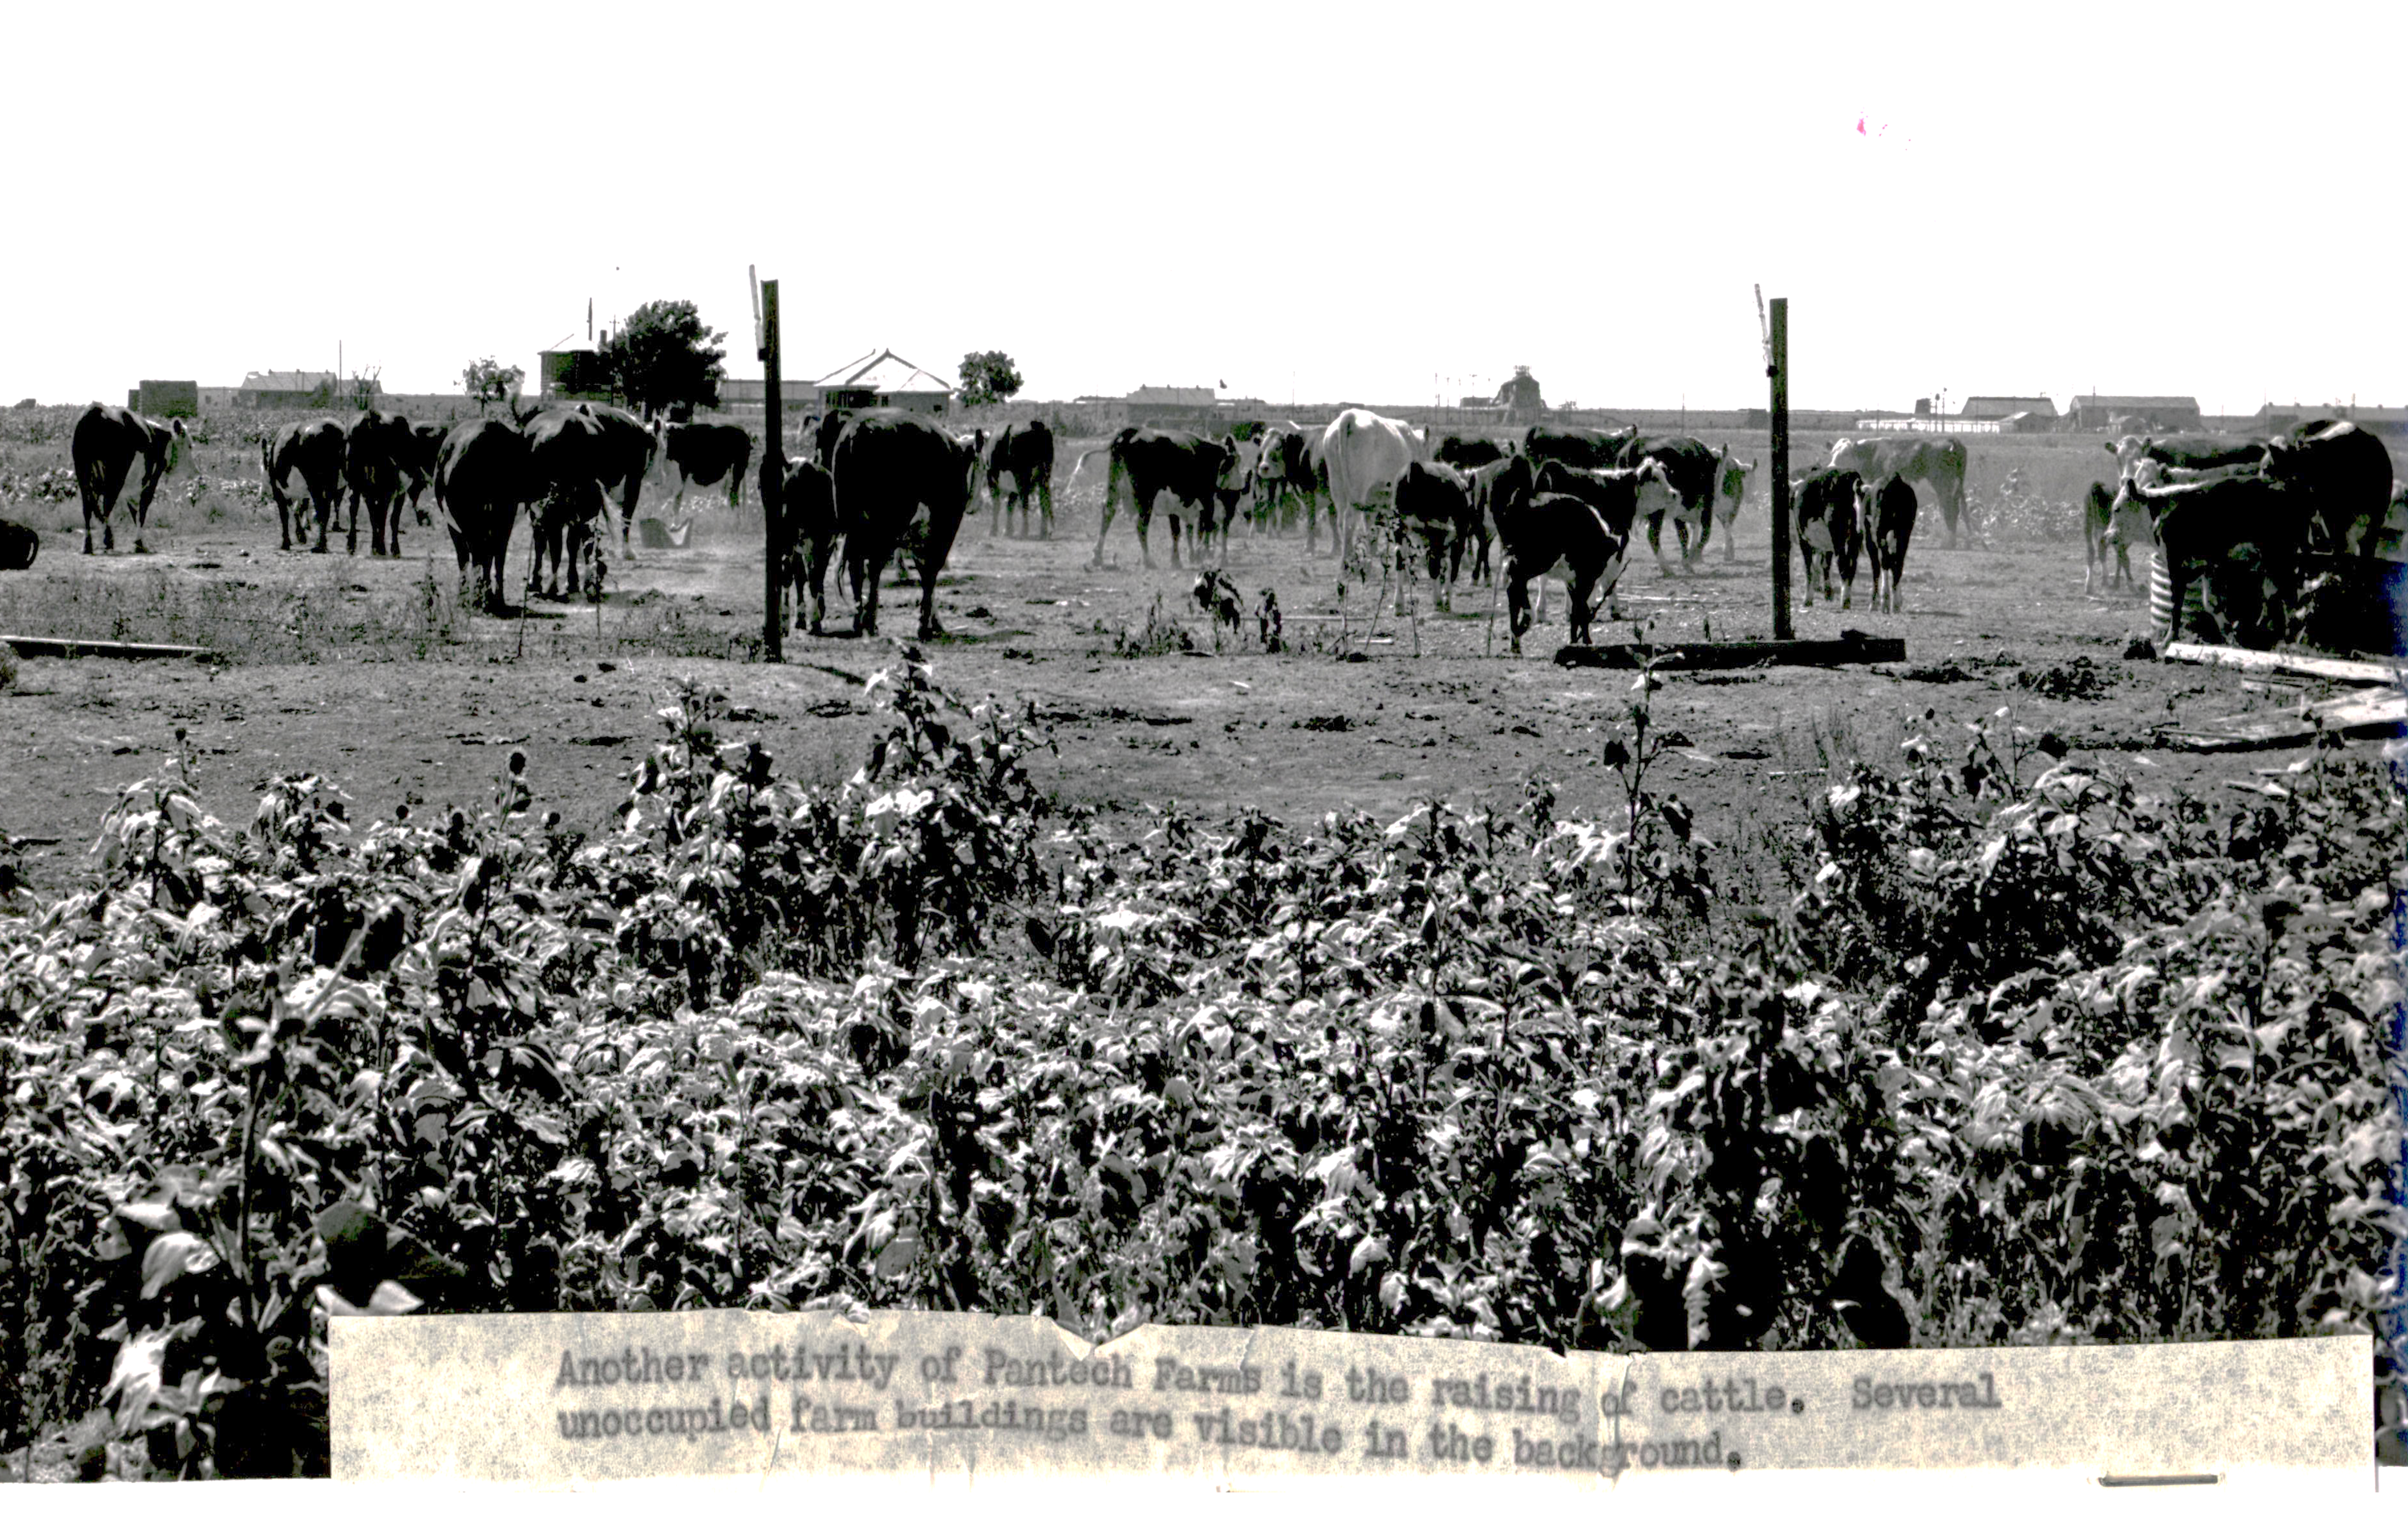 Earliest photo of cows grazing on the Texas Technological College Research Farm on Pantex site. Photo Courtesy: Katie Paul, Pantex historian.